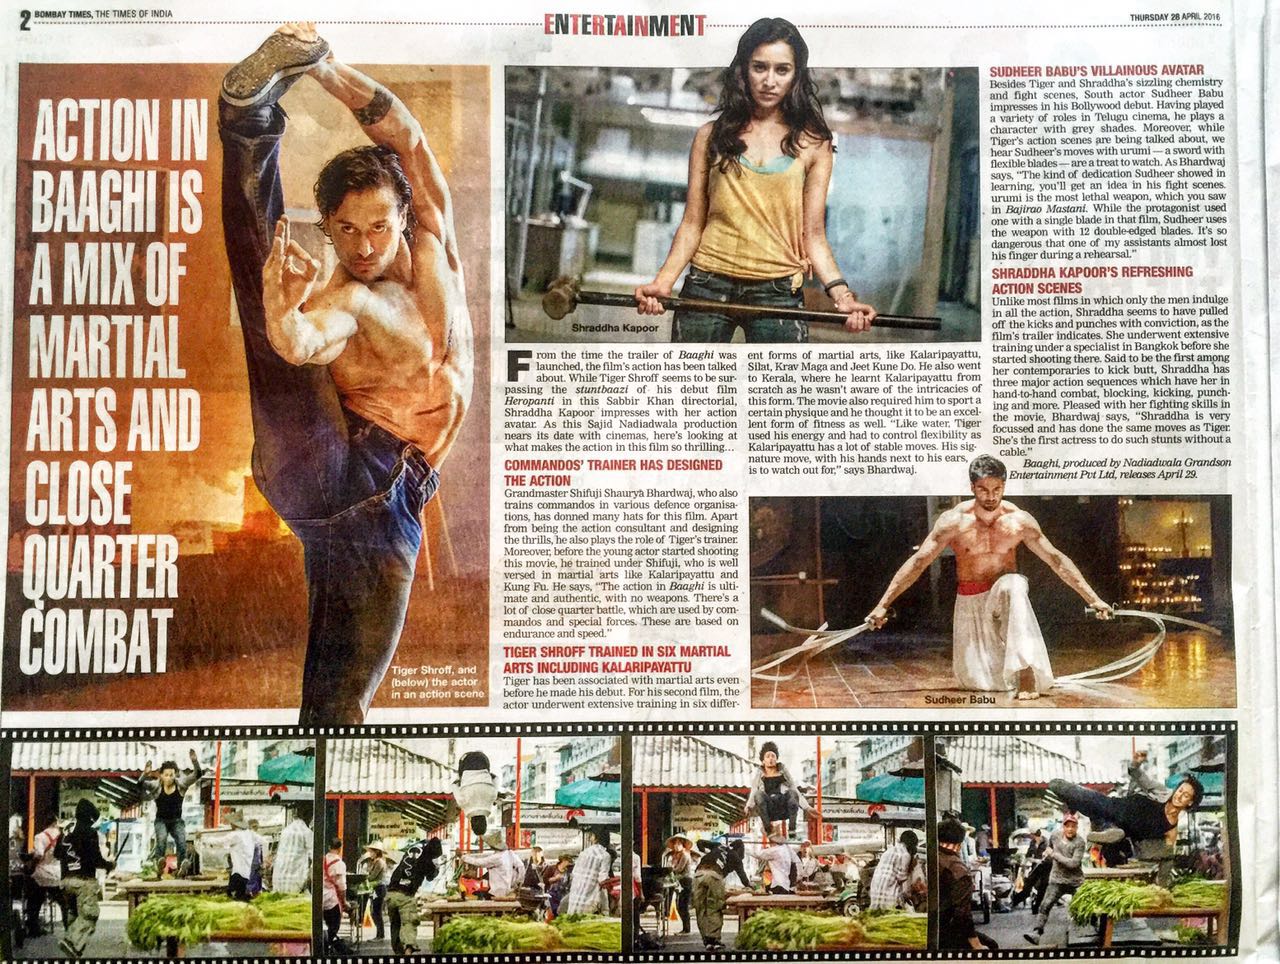 Action in Baaghi is a mix of martial arts and close quarter combat